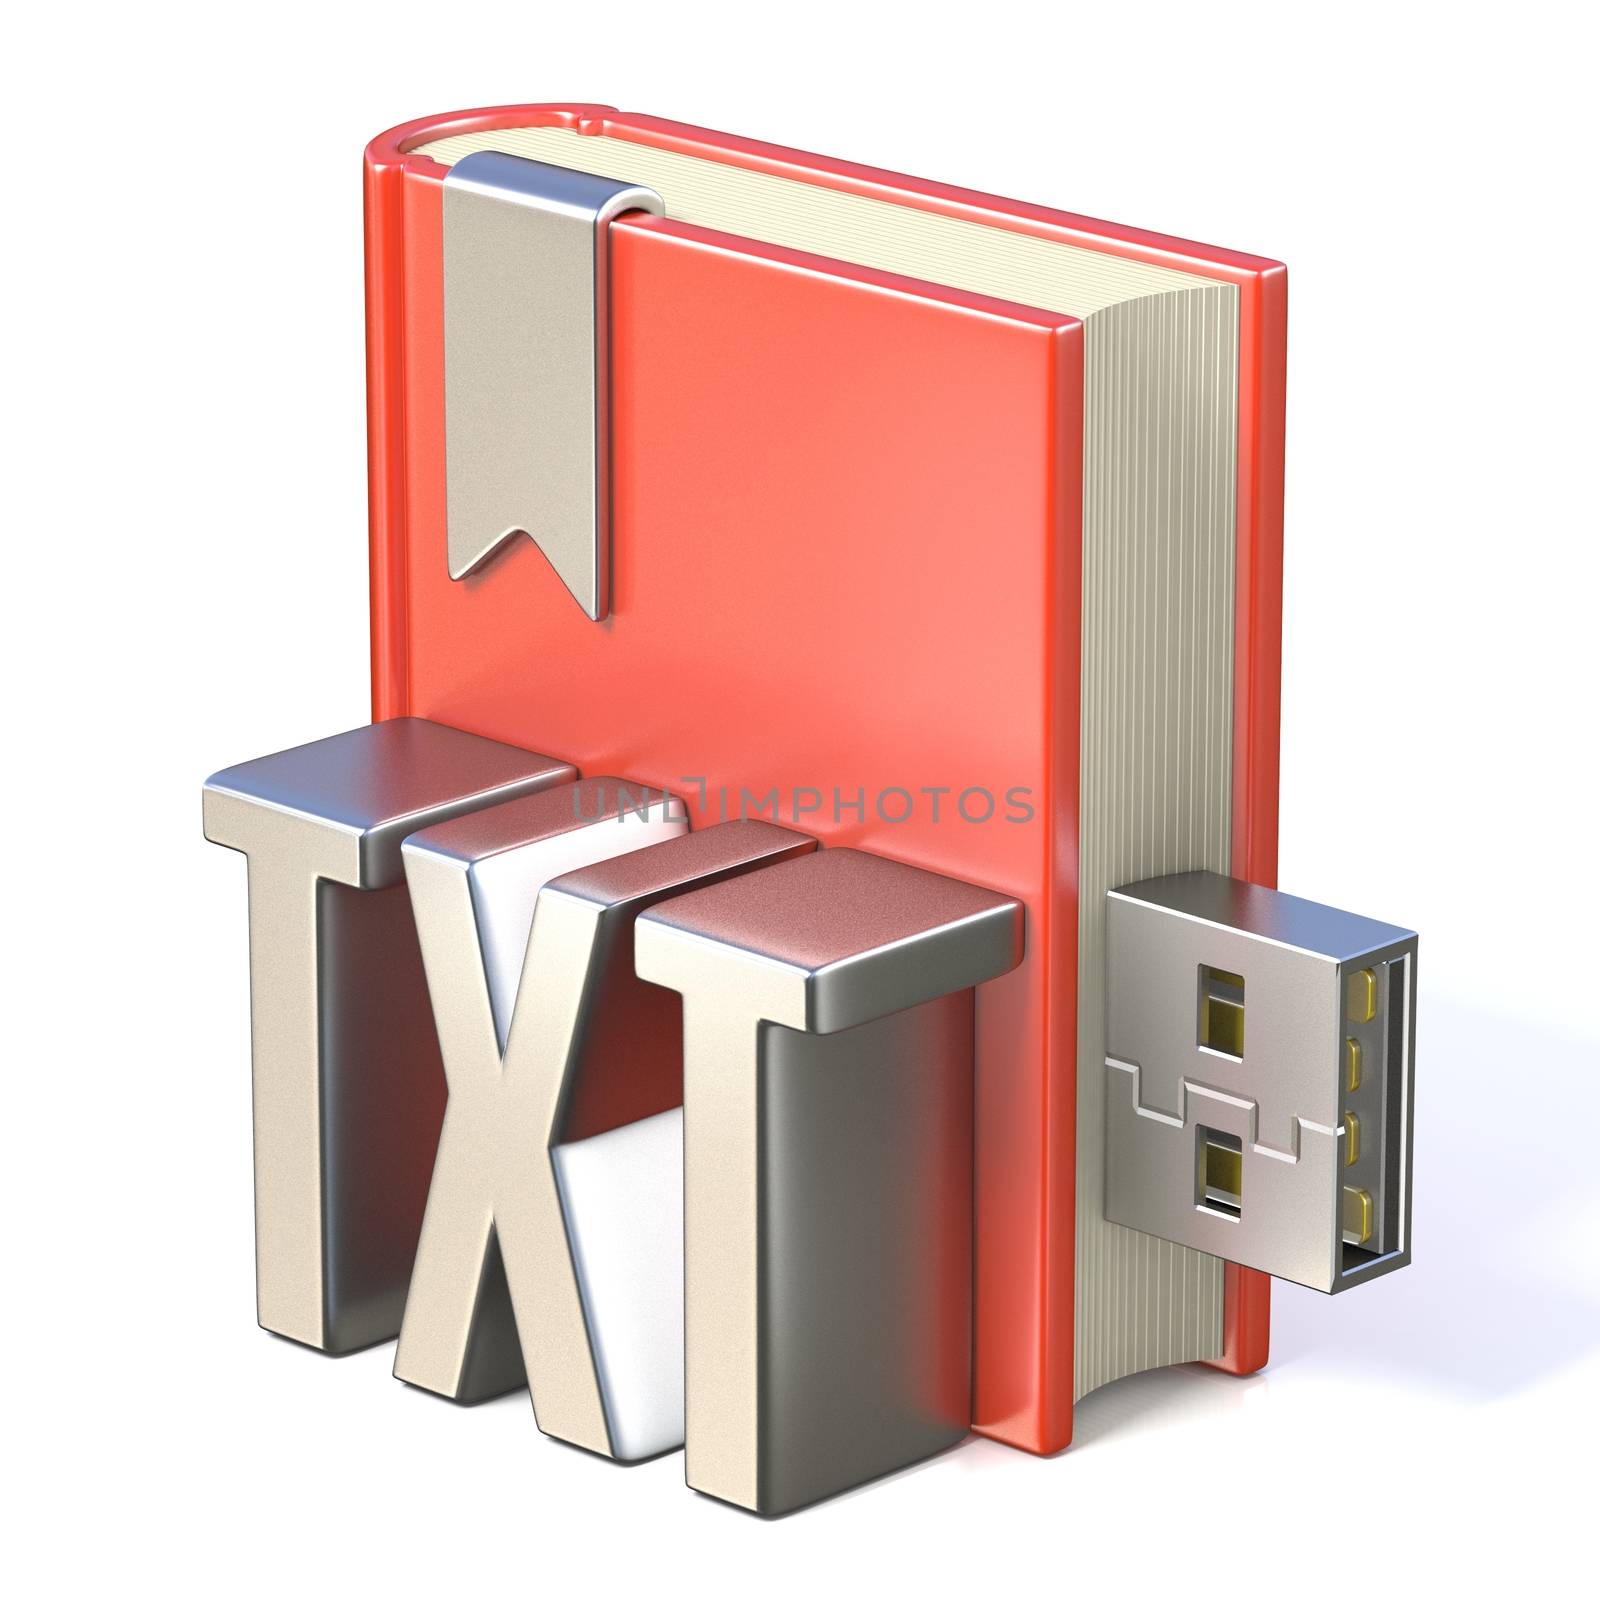 eBook icon metal TXT red book USB 3D render illustration isolated on white background